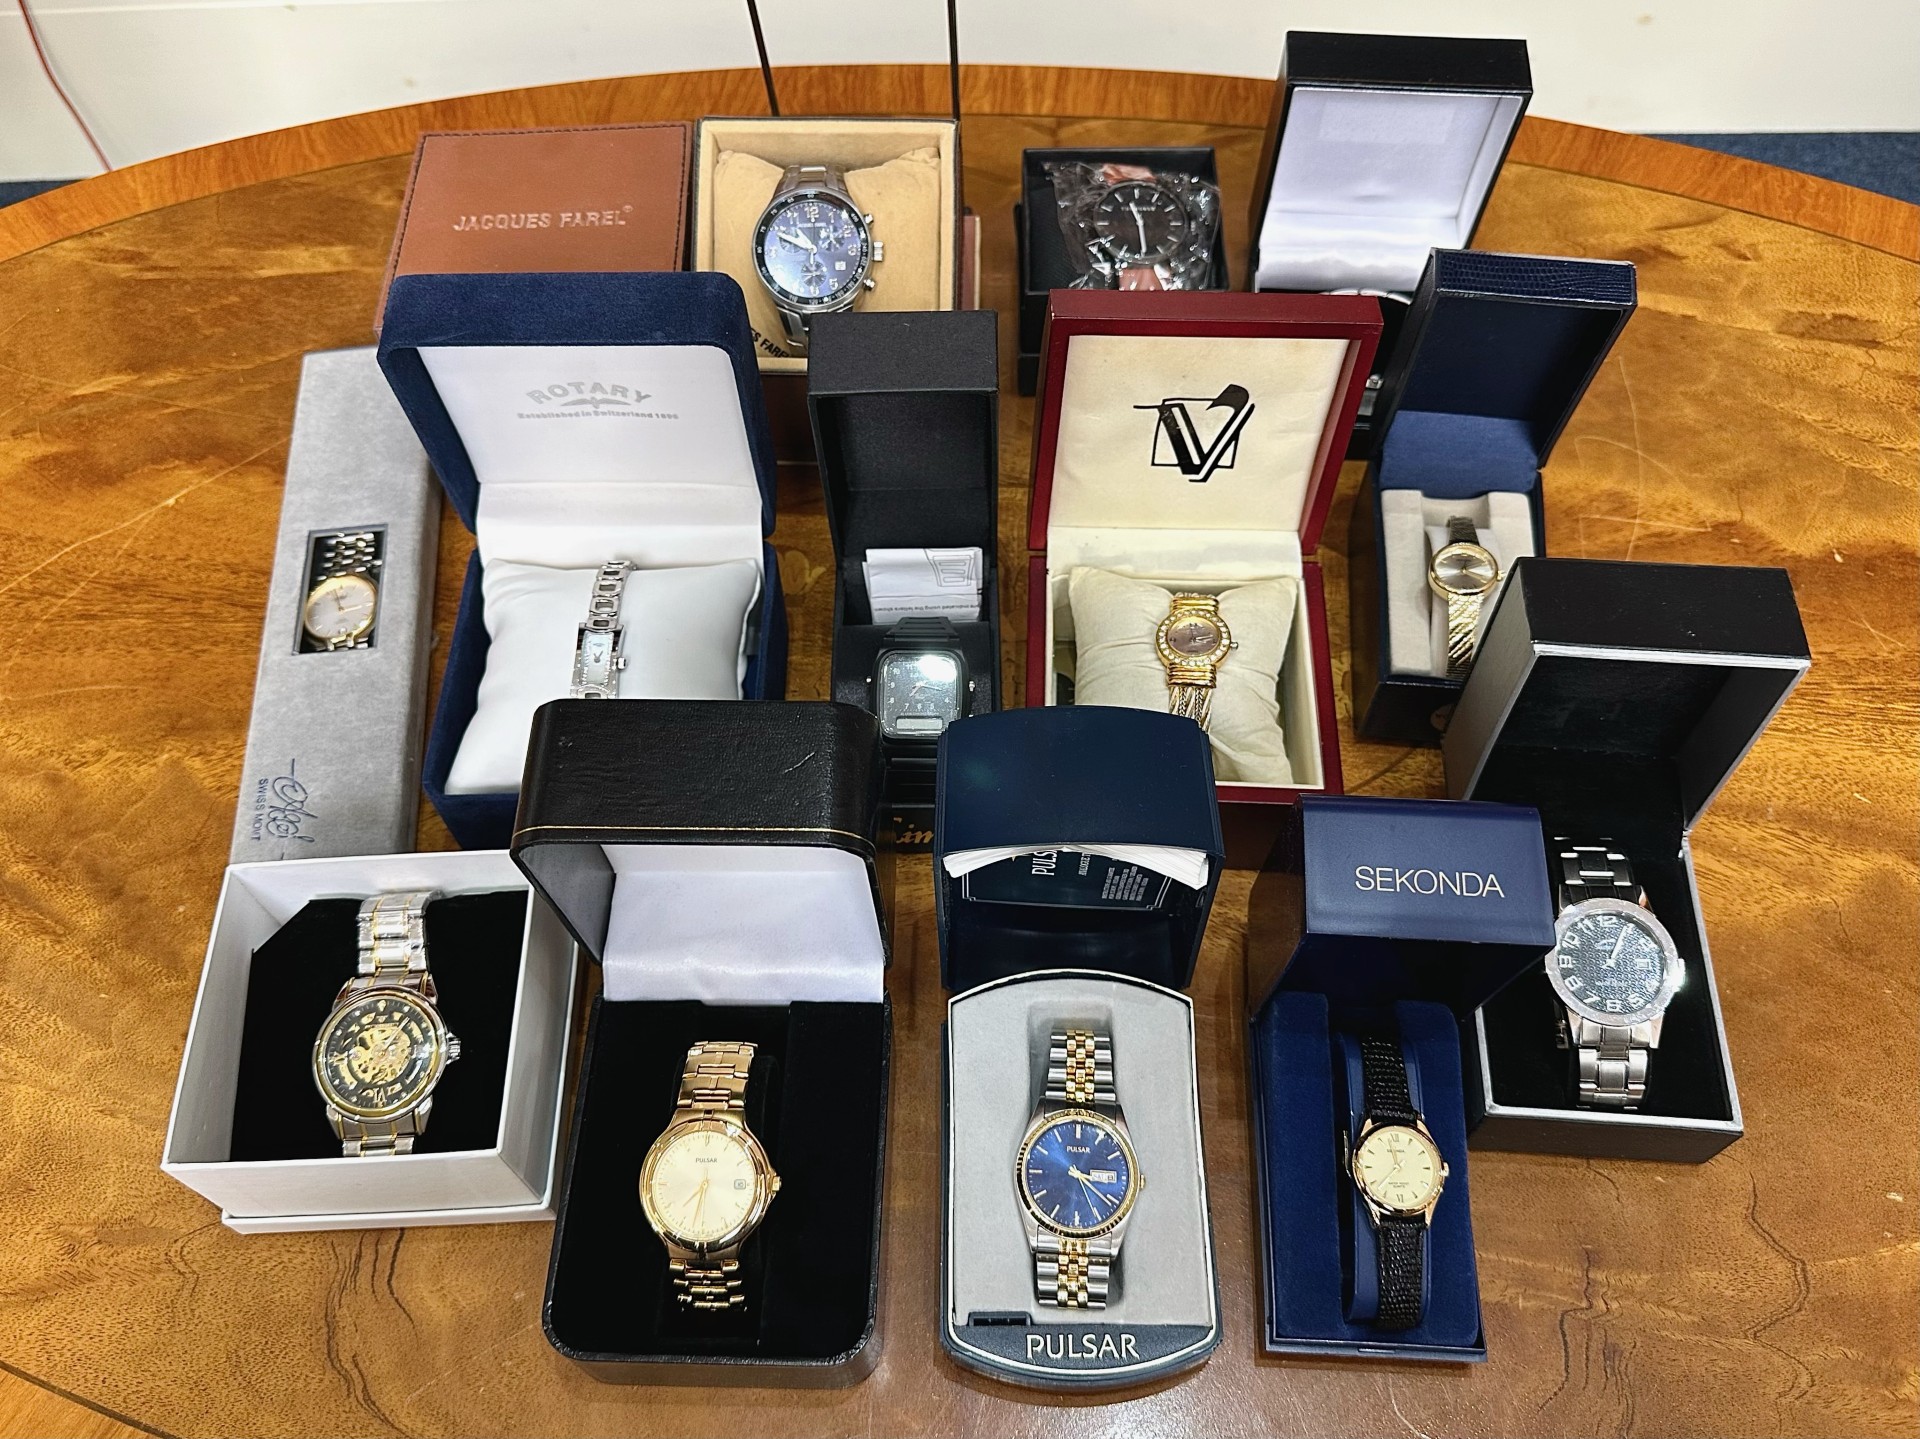 A Collection of Assorted Boxed Wrist Watches Jaques Farel, Rotary, Pulsar, Slazenger, Sekonda etc - Image 3 of 4